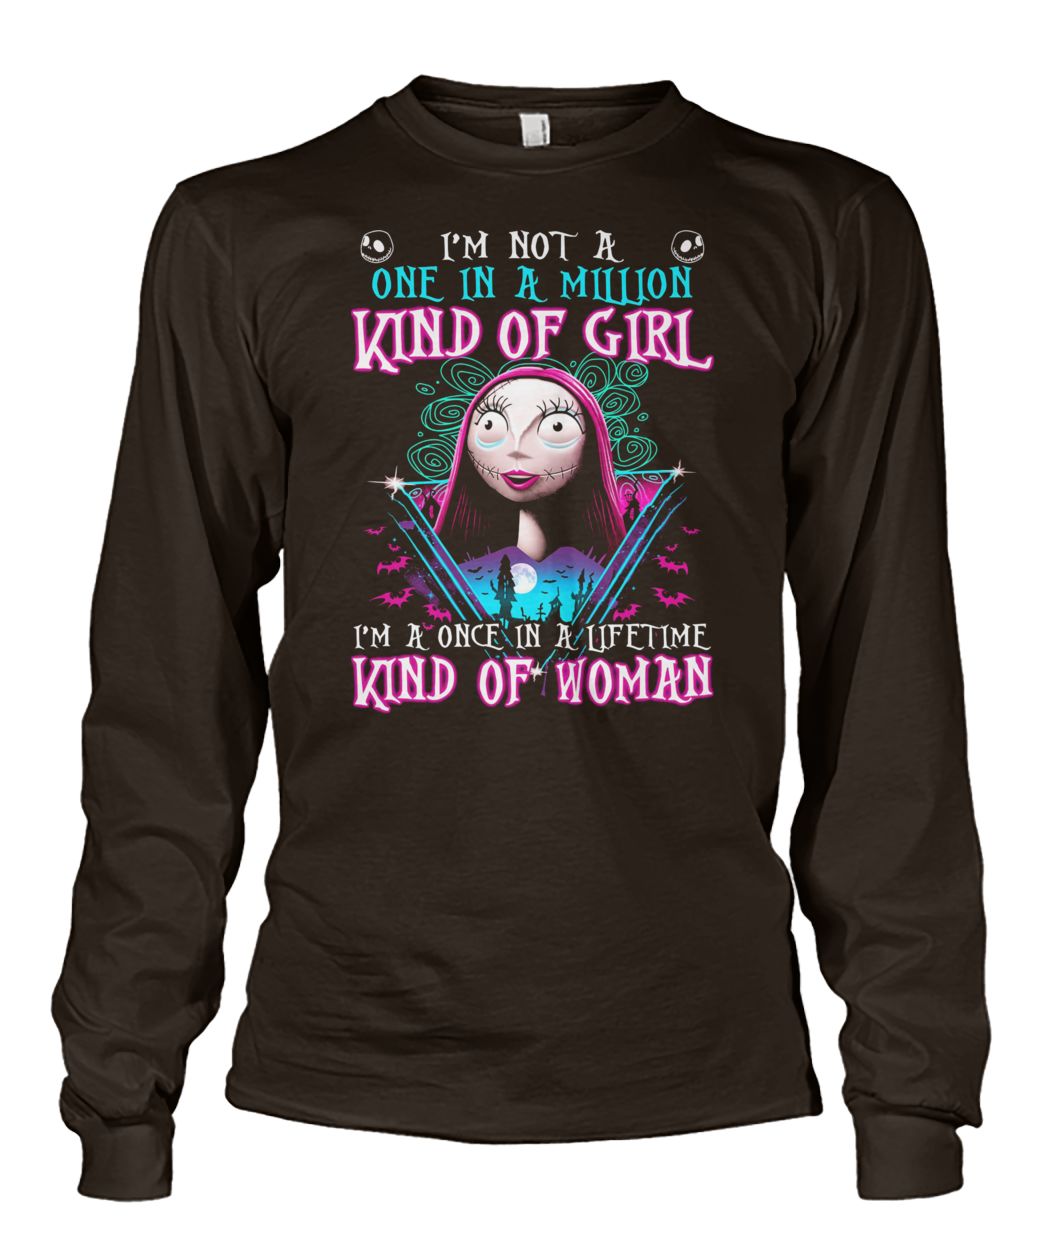 Sally I'm not a one in a million kind of girl unisex long sleeve